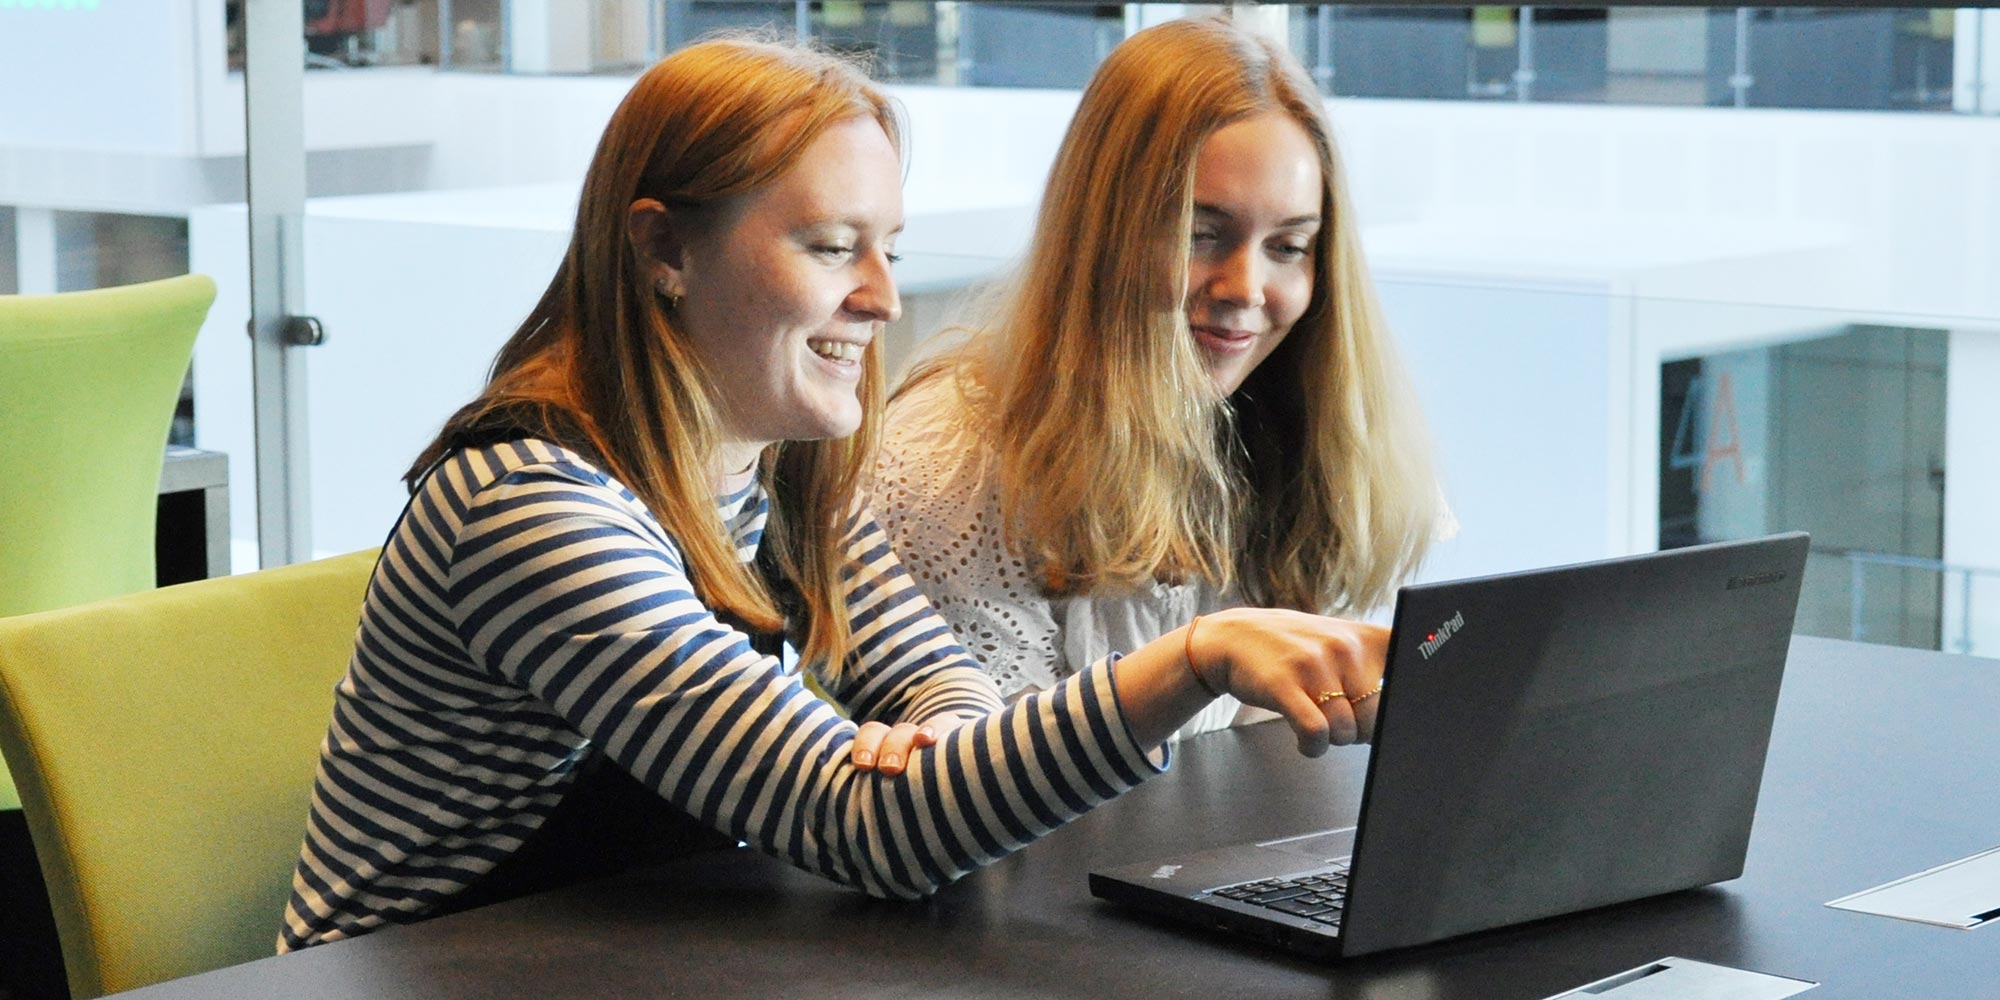 Two female students at table, looking at a laptop